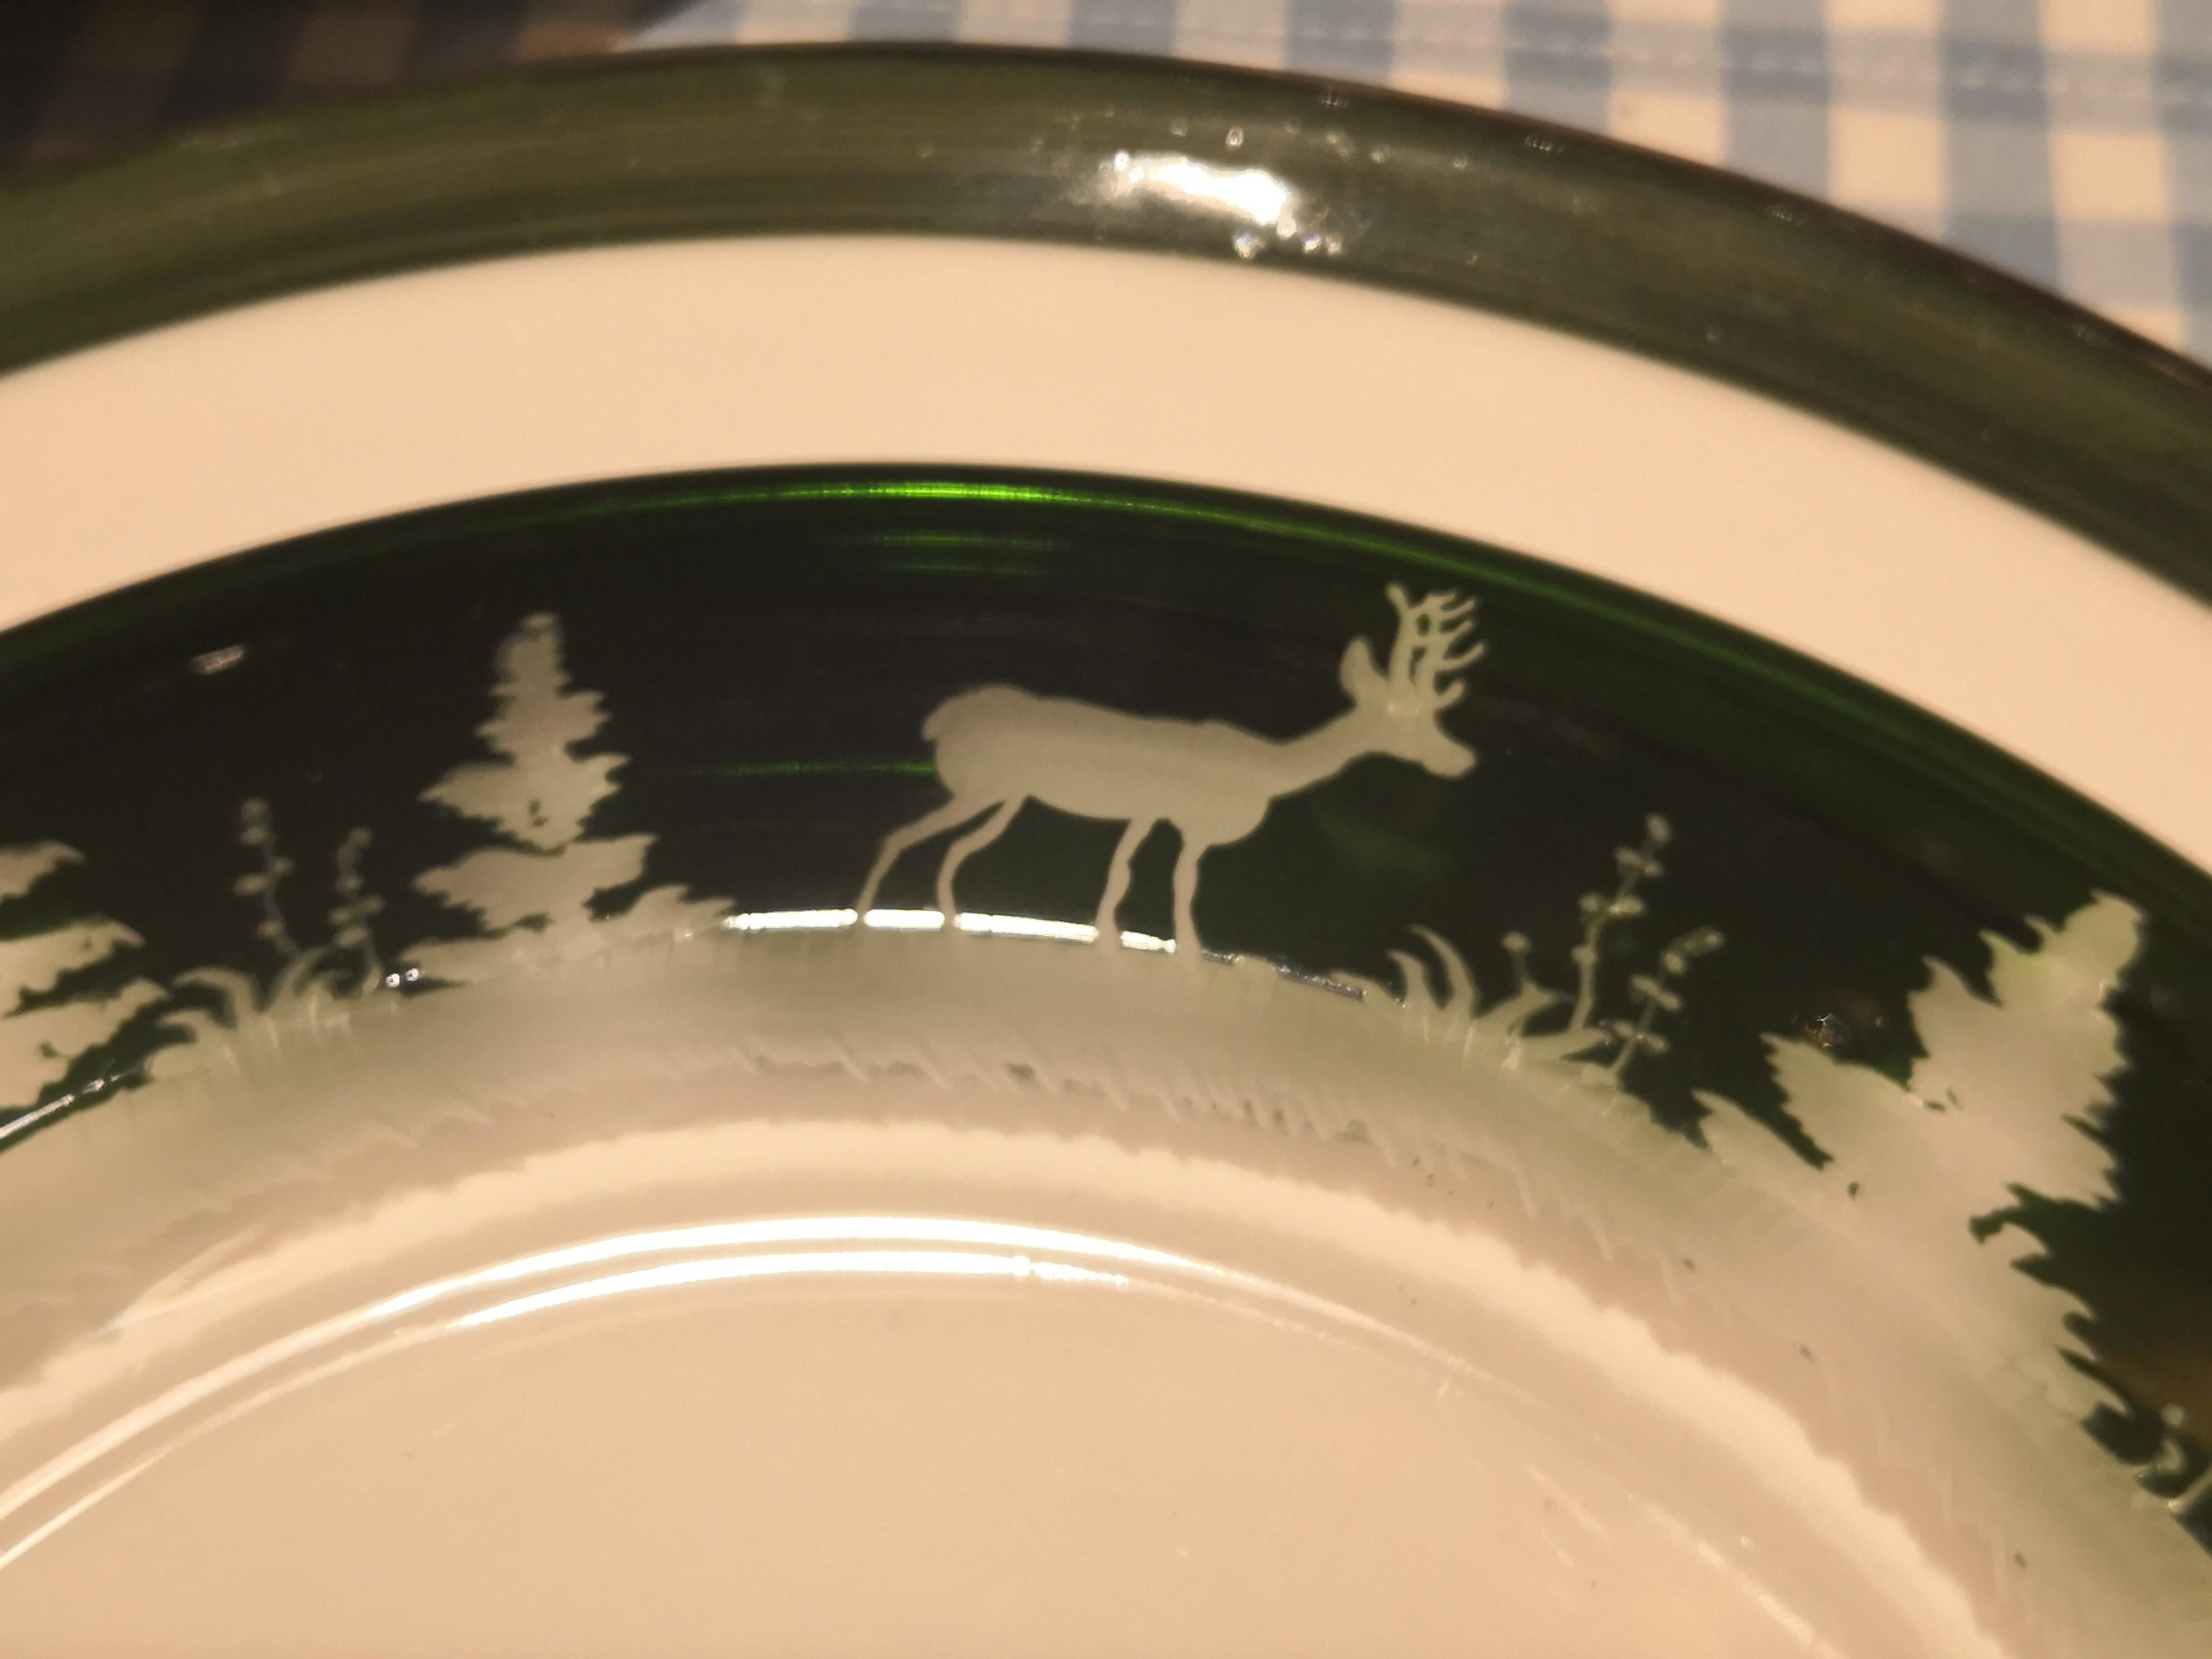 Set of six plates in green crystal with an antique hunting decor all around. The charming black forest decor is hand.-engraved and shows an antique decor of deers, rabbit and trees. The glass plates can be ordered in different colors. All Sofina